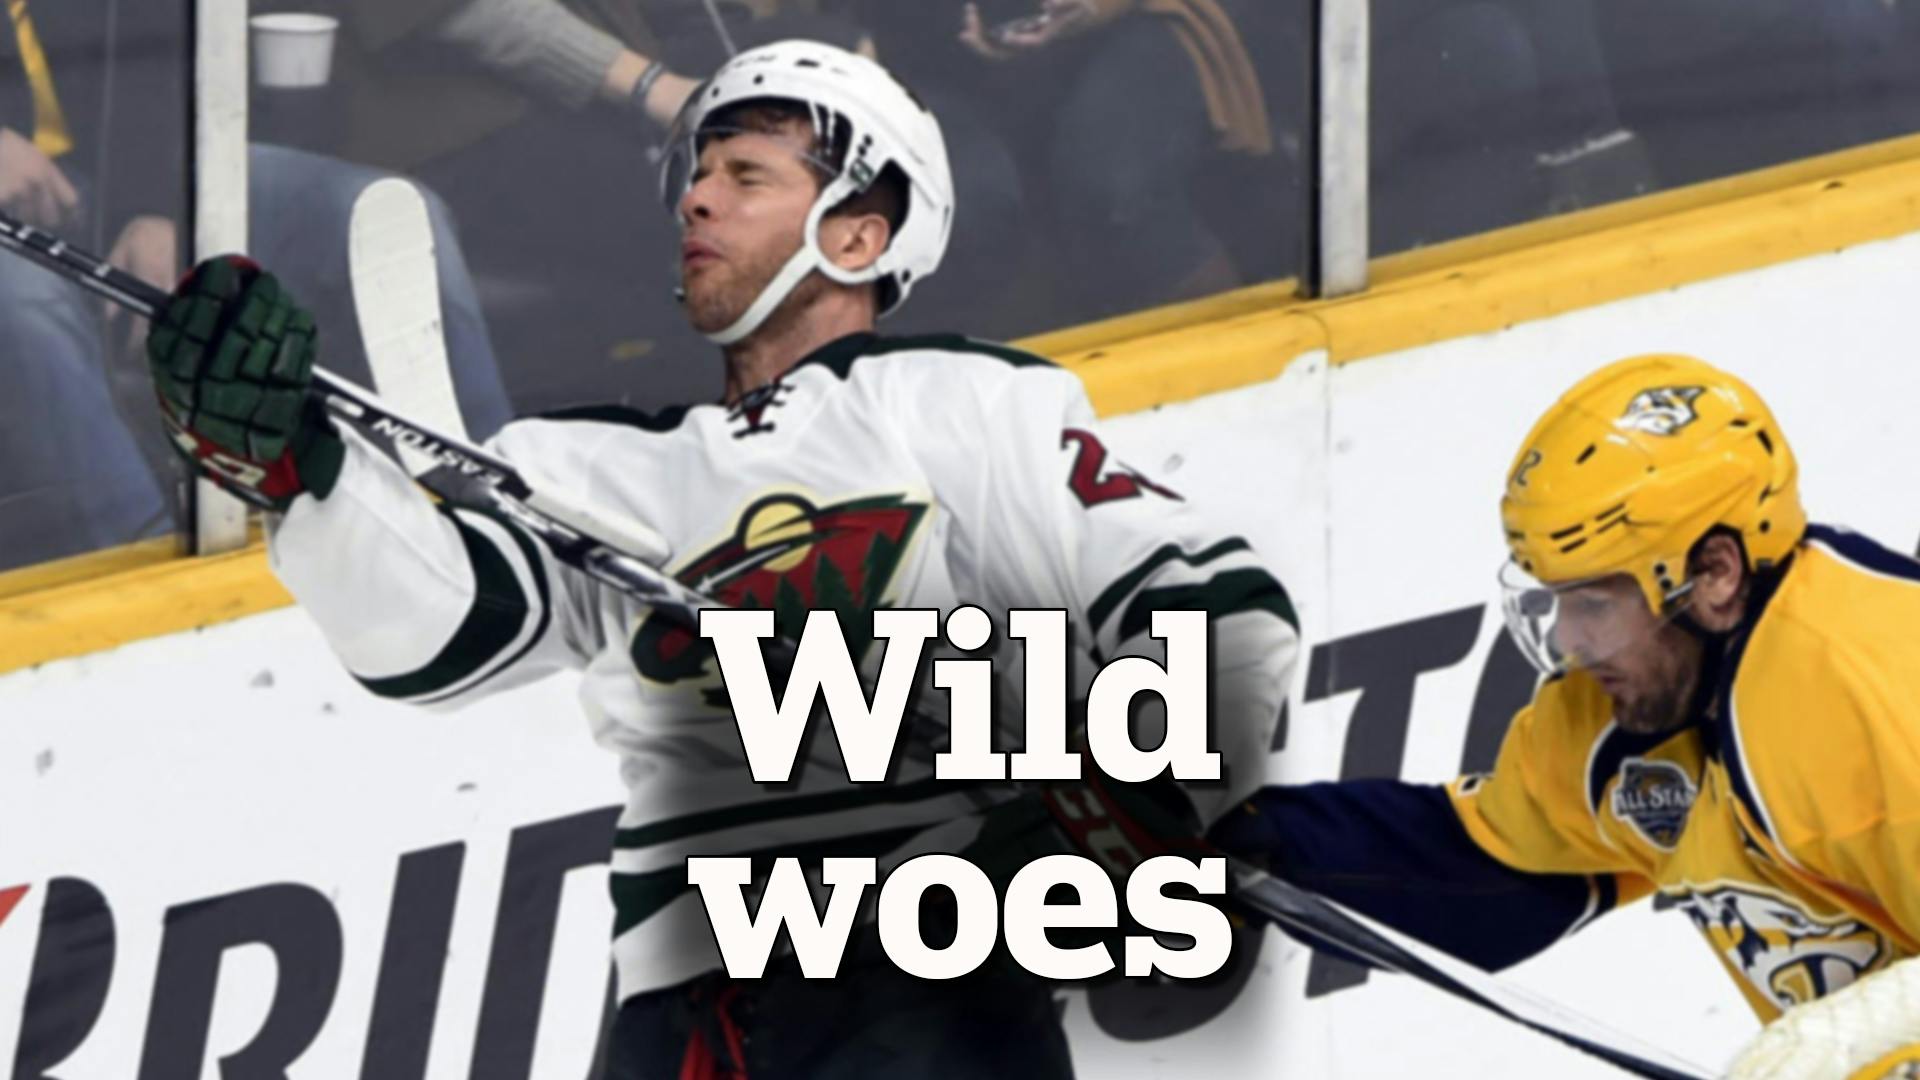 The Wild's slide is generating chatter about the status of the head coach